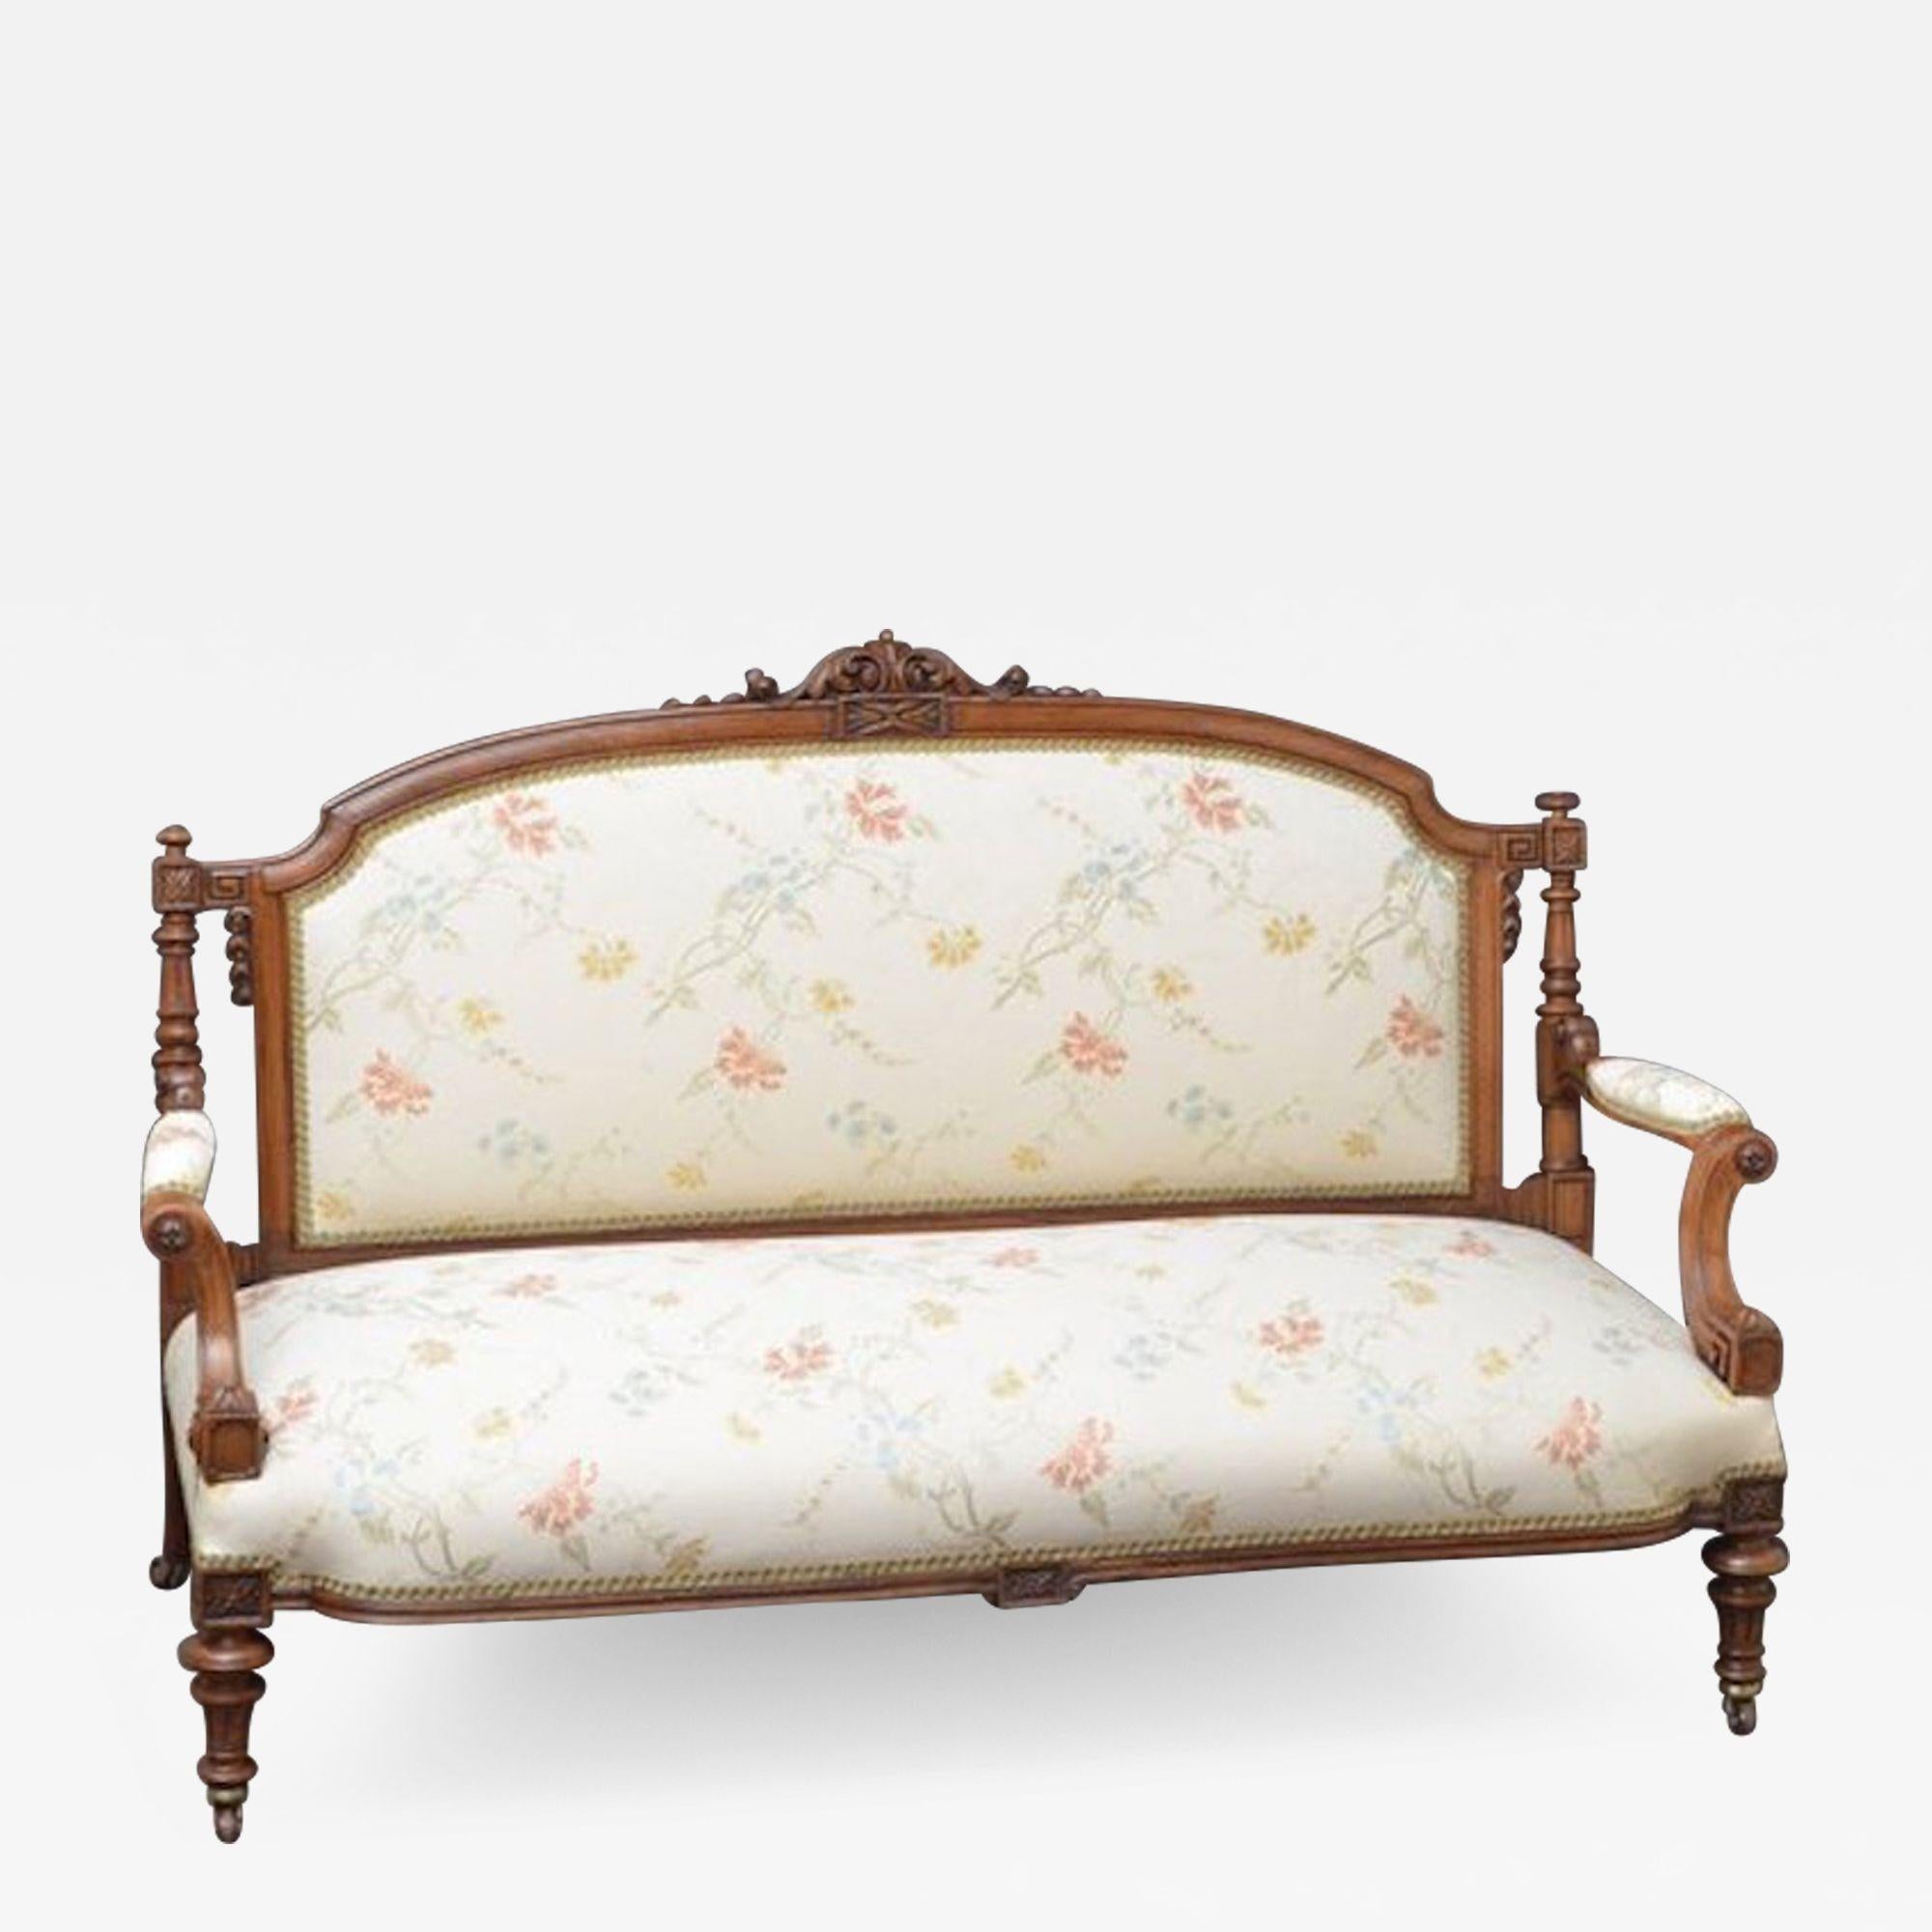 Sn3818 Fine quality, substantial Victorian sofa in walnut, having elegant shaped back with scrolling foliate carving, flanked by fluted columns and intricate detailing, above scrolled open arms and turned and fluted legs terminating in brass